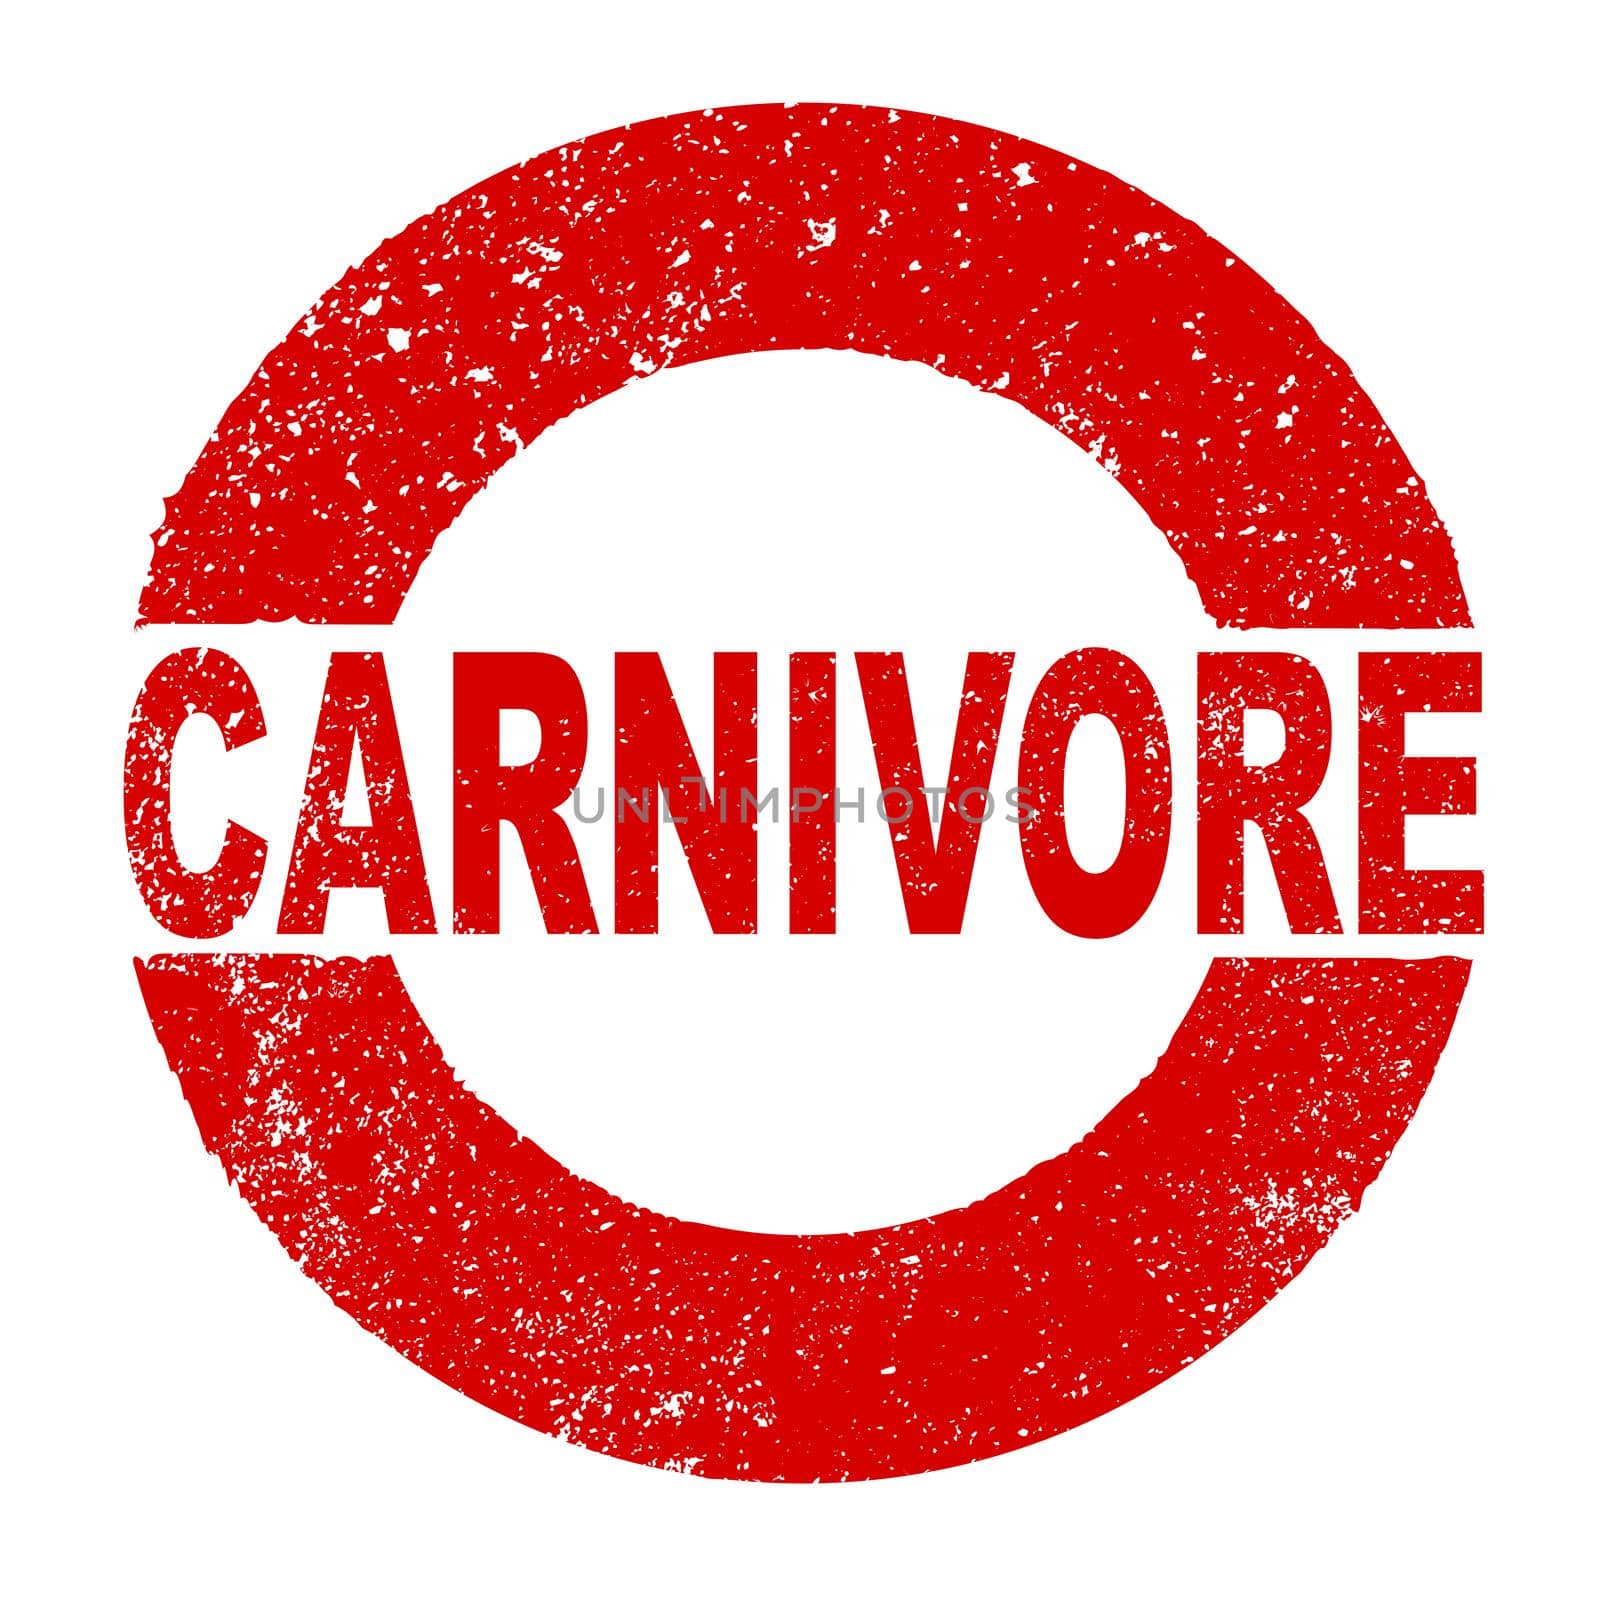 A red grunge rubber ink stamp with the text Carnivore over a white background